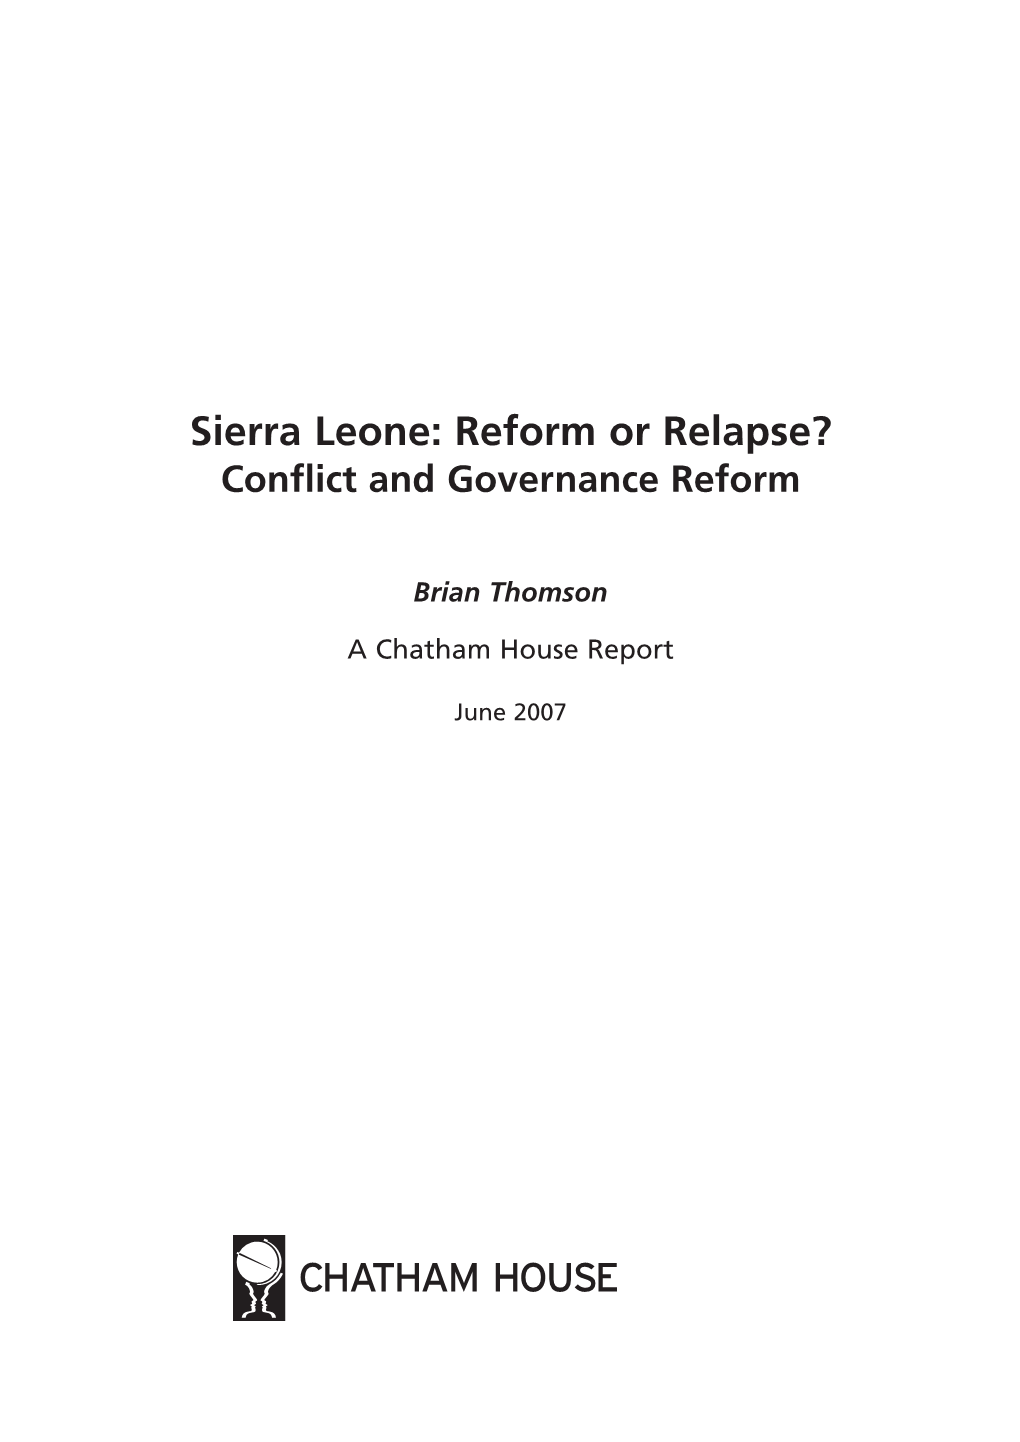 Sierra Leone: Reform Or Relapse? Conflict and Governance Reform